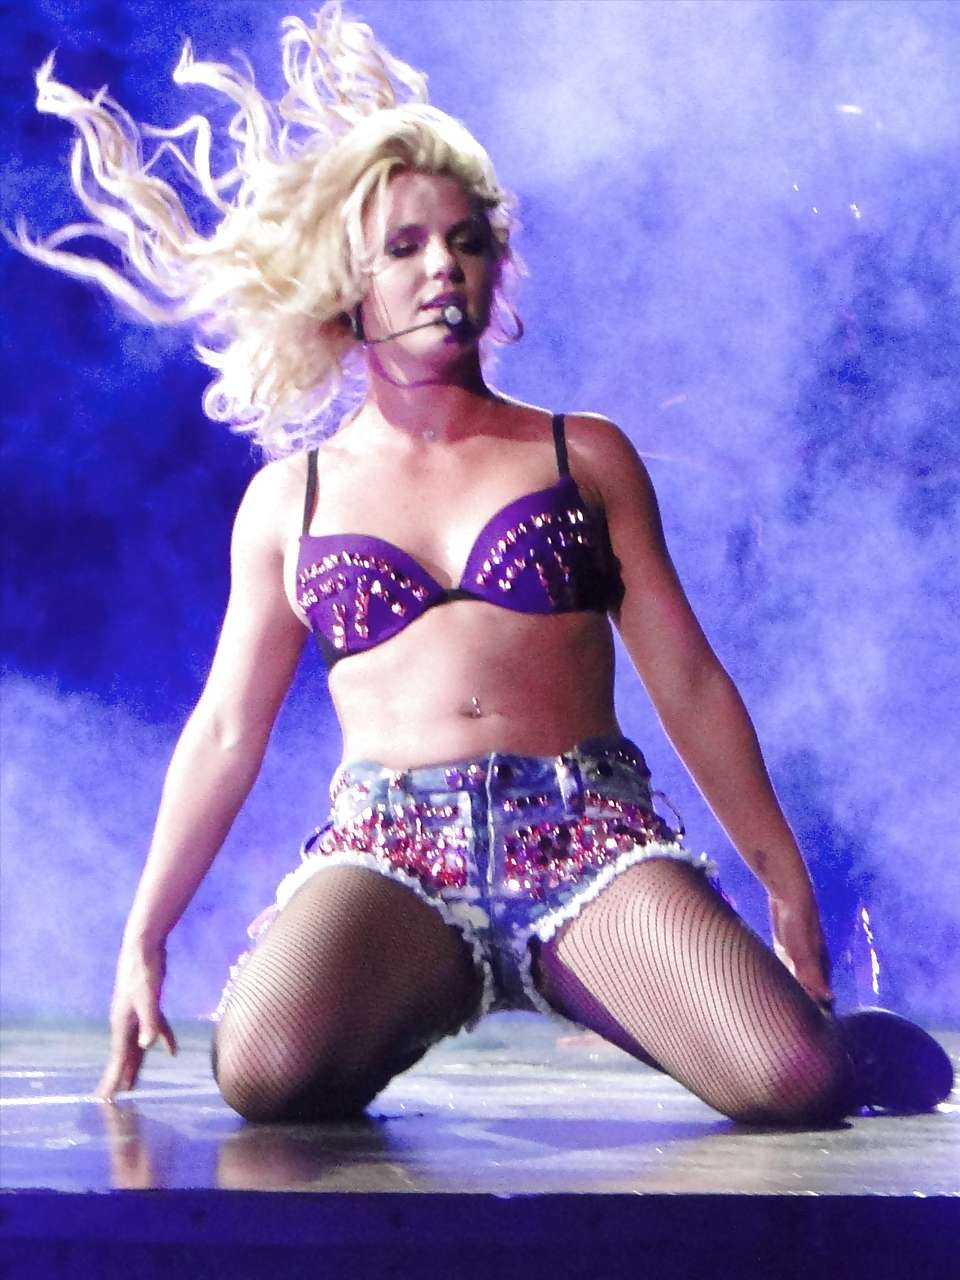 Britney Spears in fishnets and shorts spreading her legs on stage #75299163